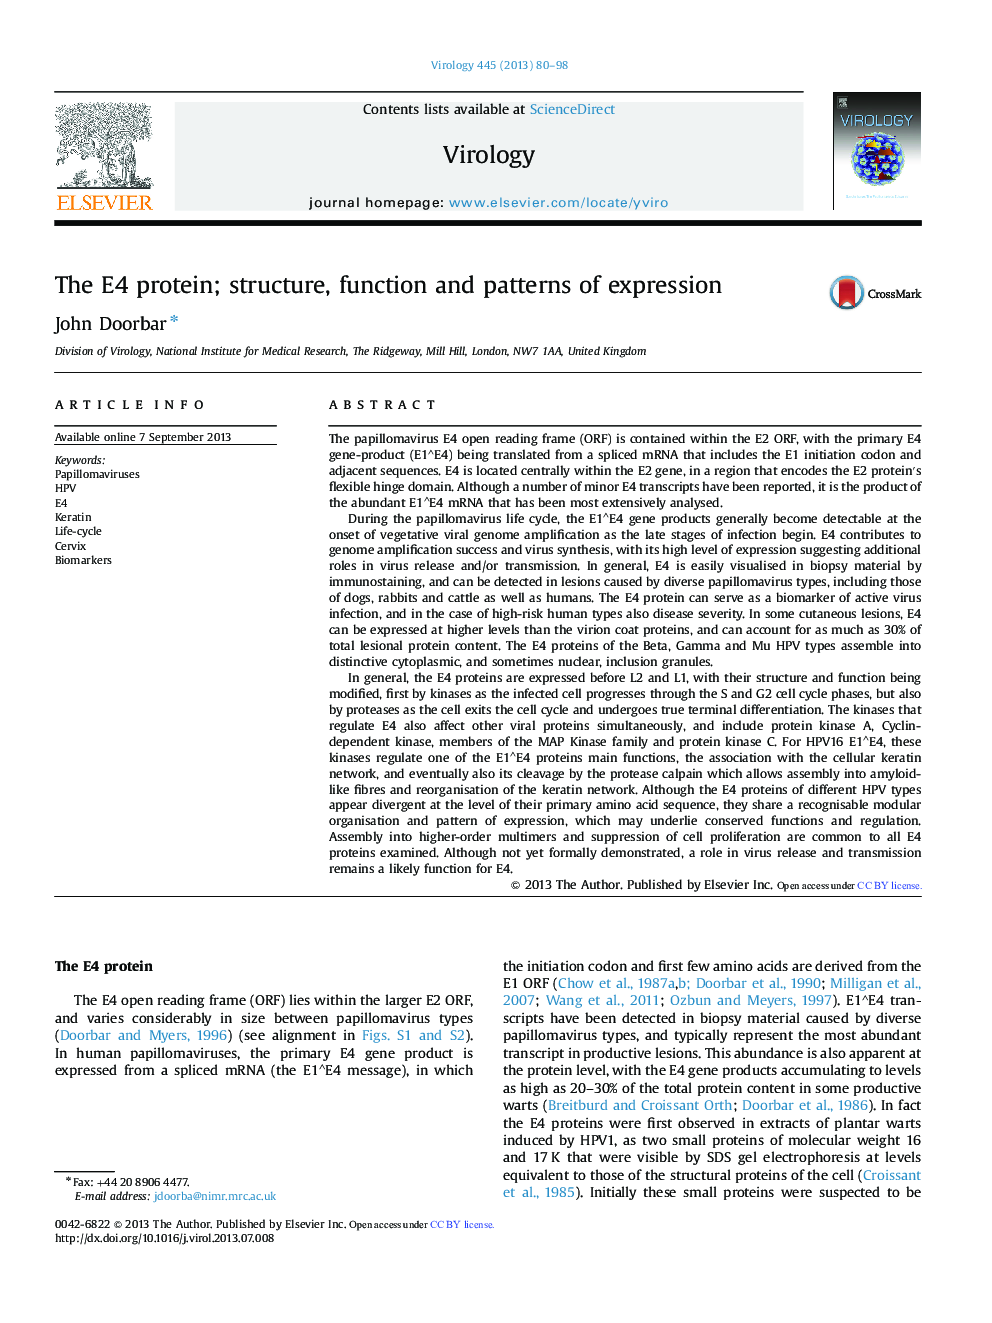 The E4 protein; structure, function and patterns of expression